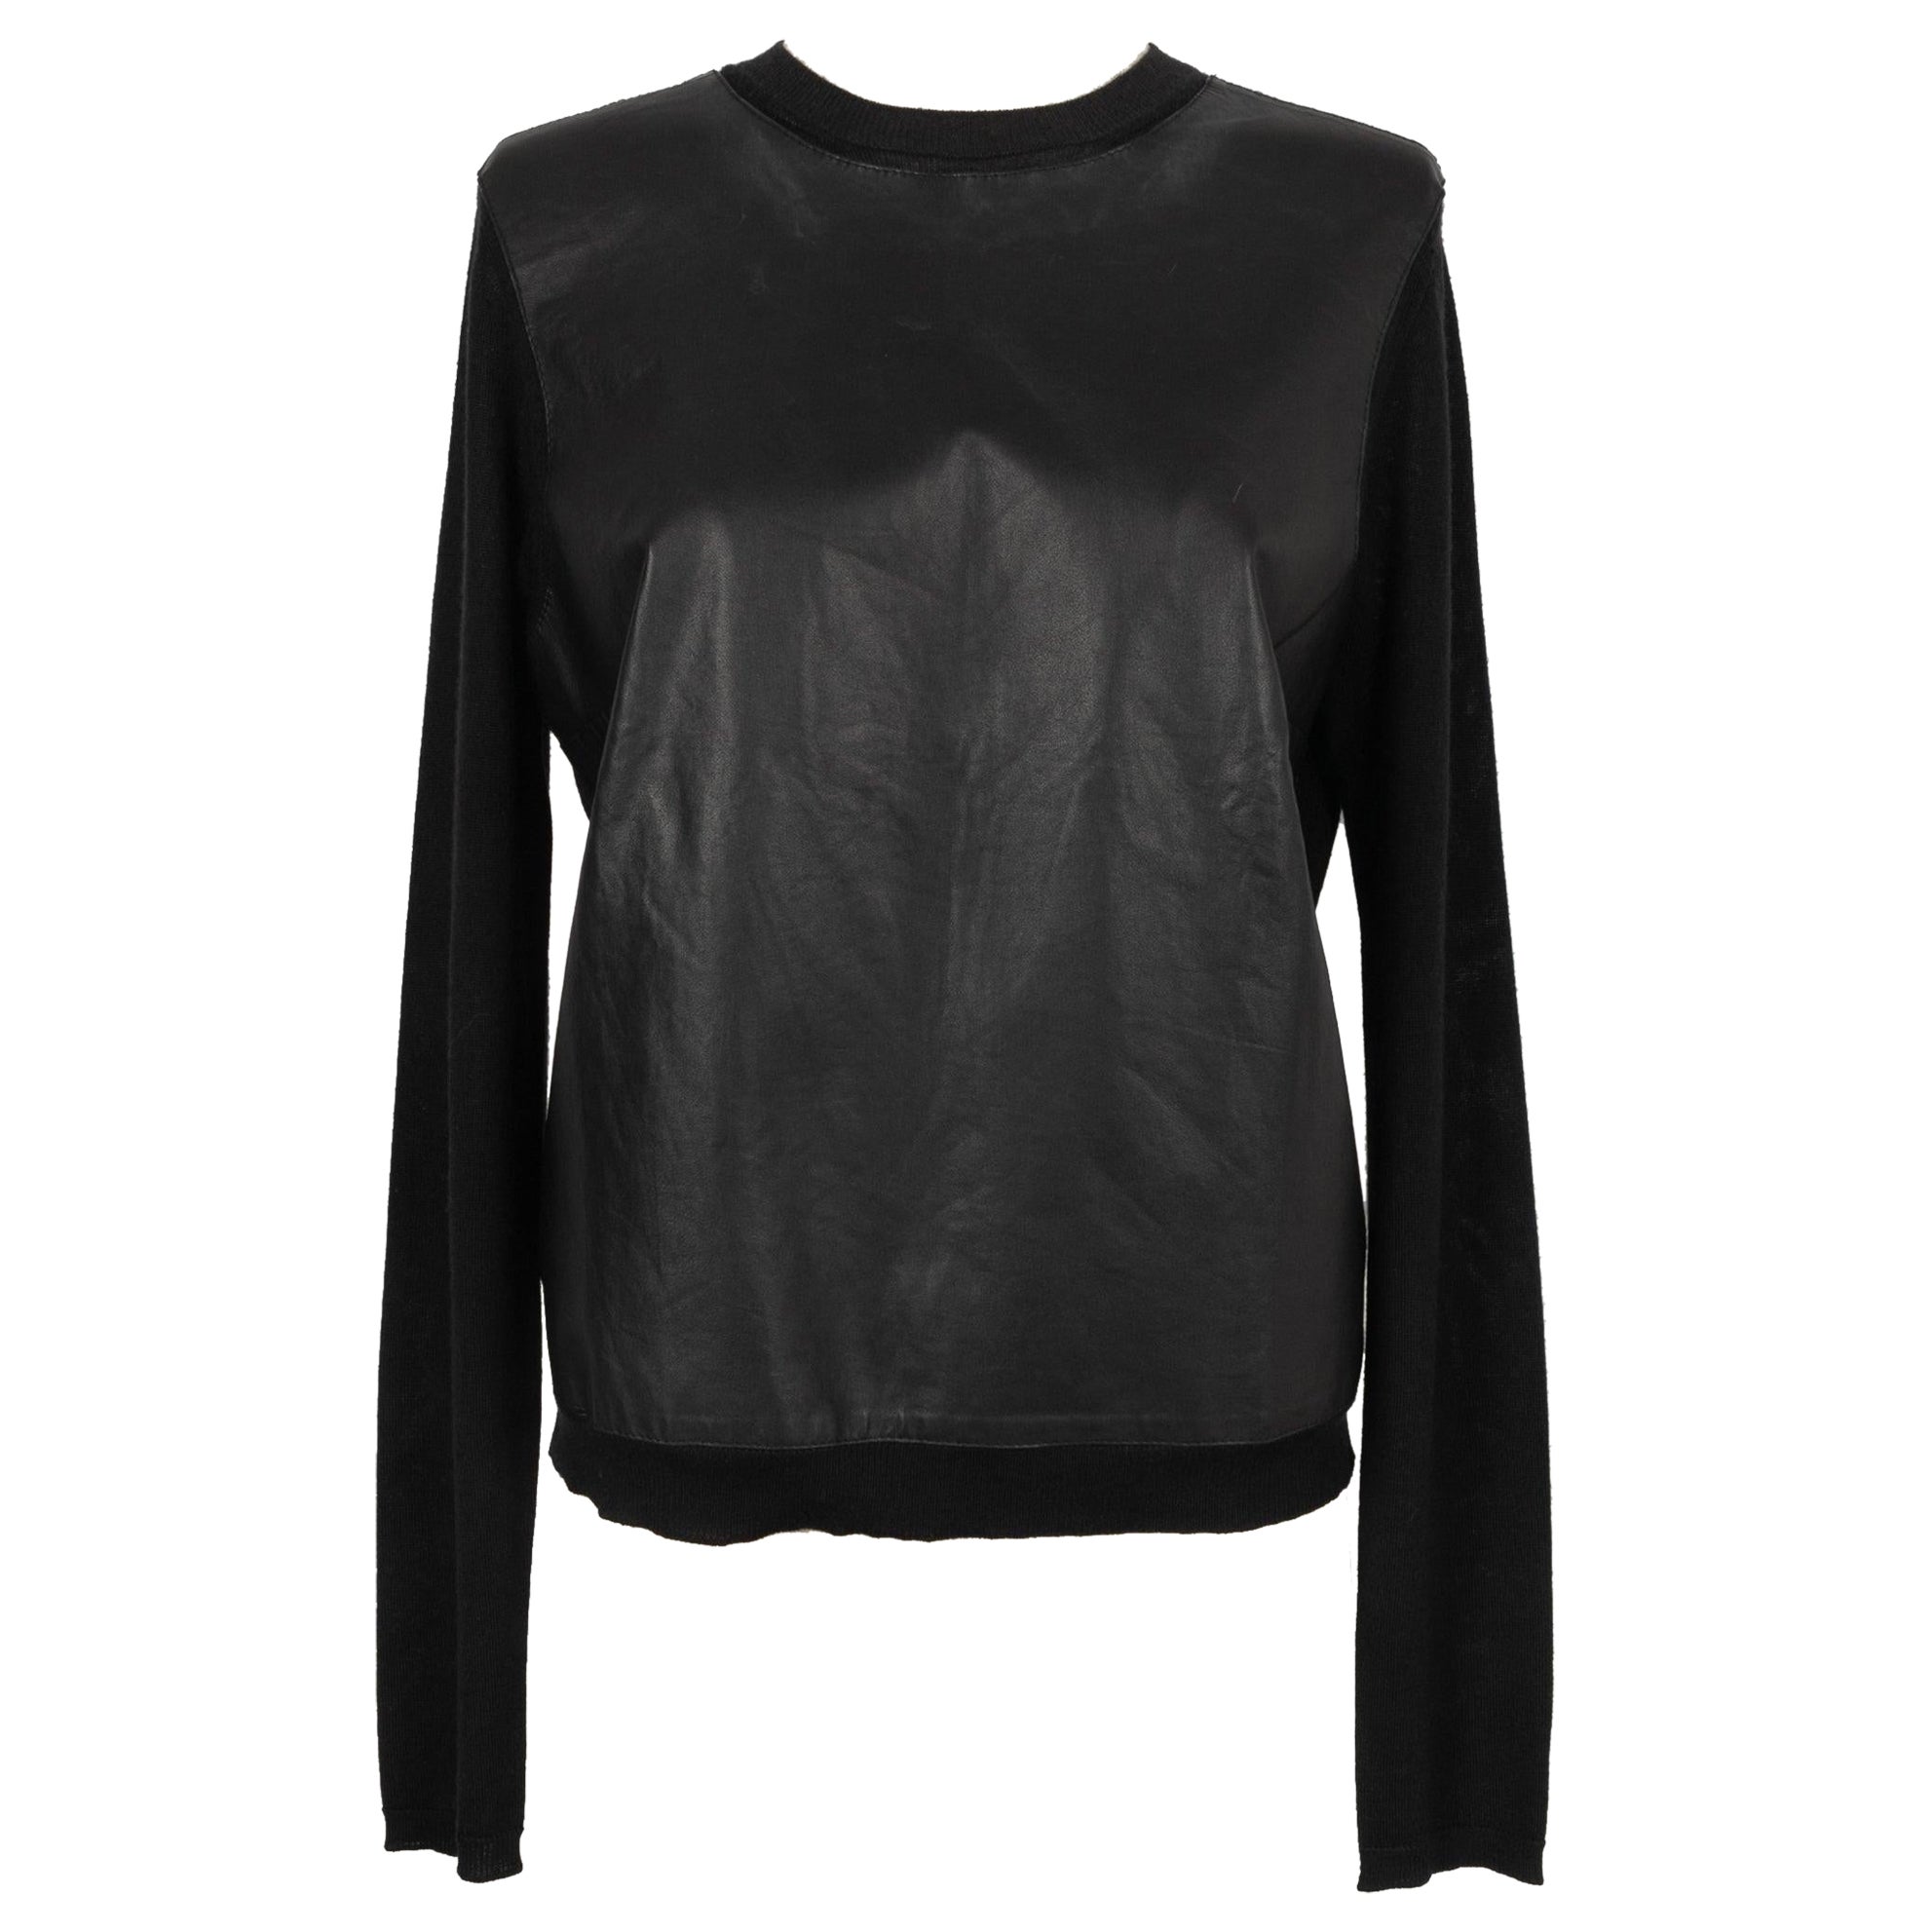 Christian Dior Black Lambskin and Cashmere Long-Sleeved Top 42FR